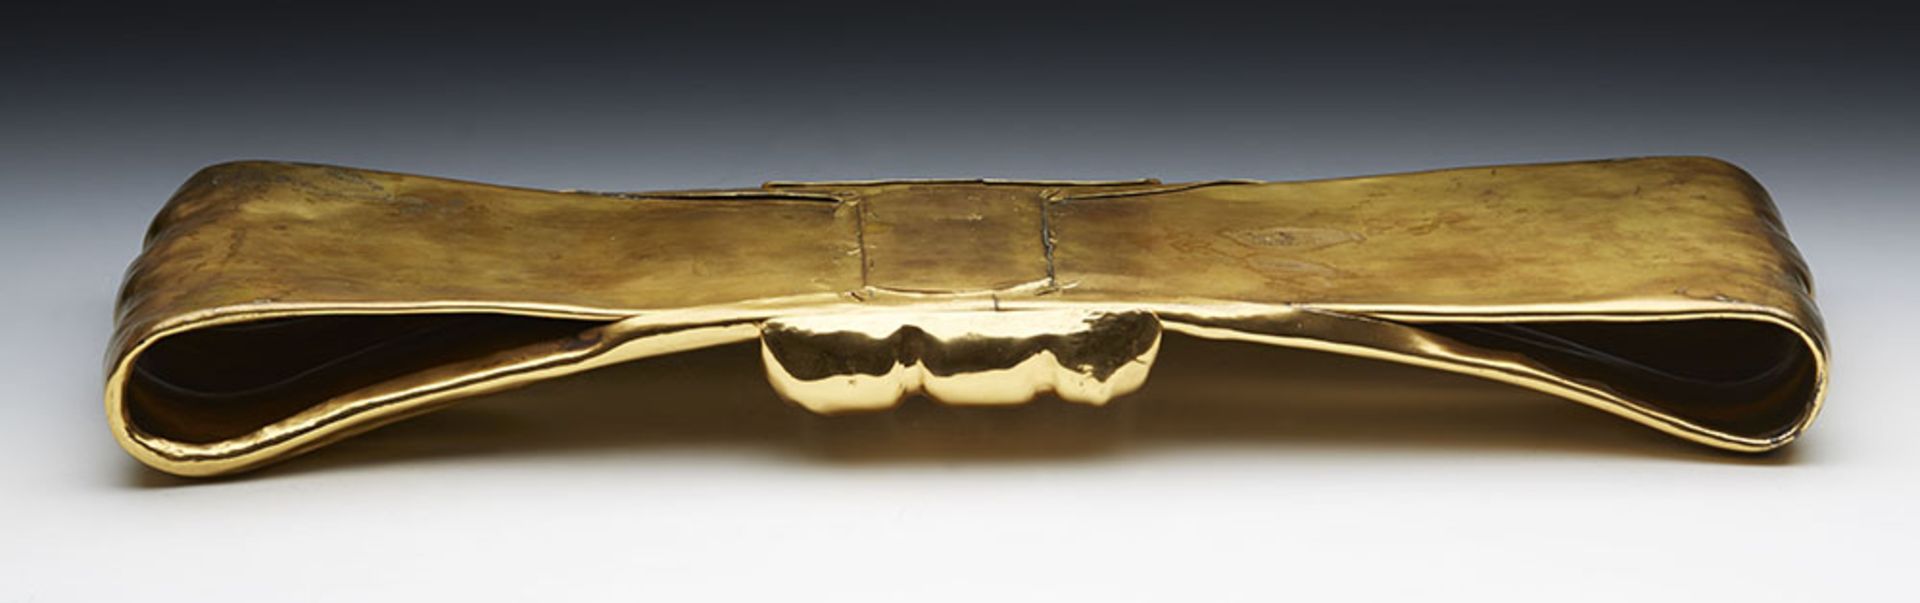 Dulany Studio Gilt Metal Bow By Helen Hughes Early 20Th C. - Image 6 of 11